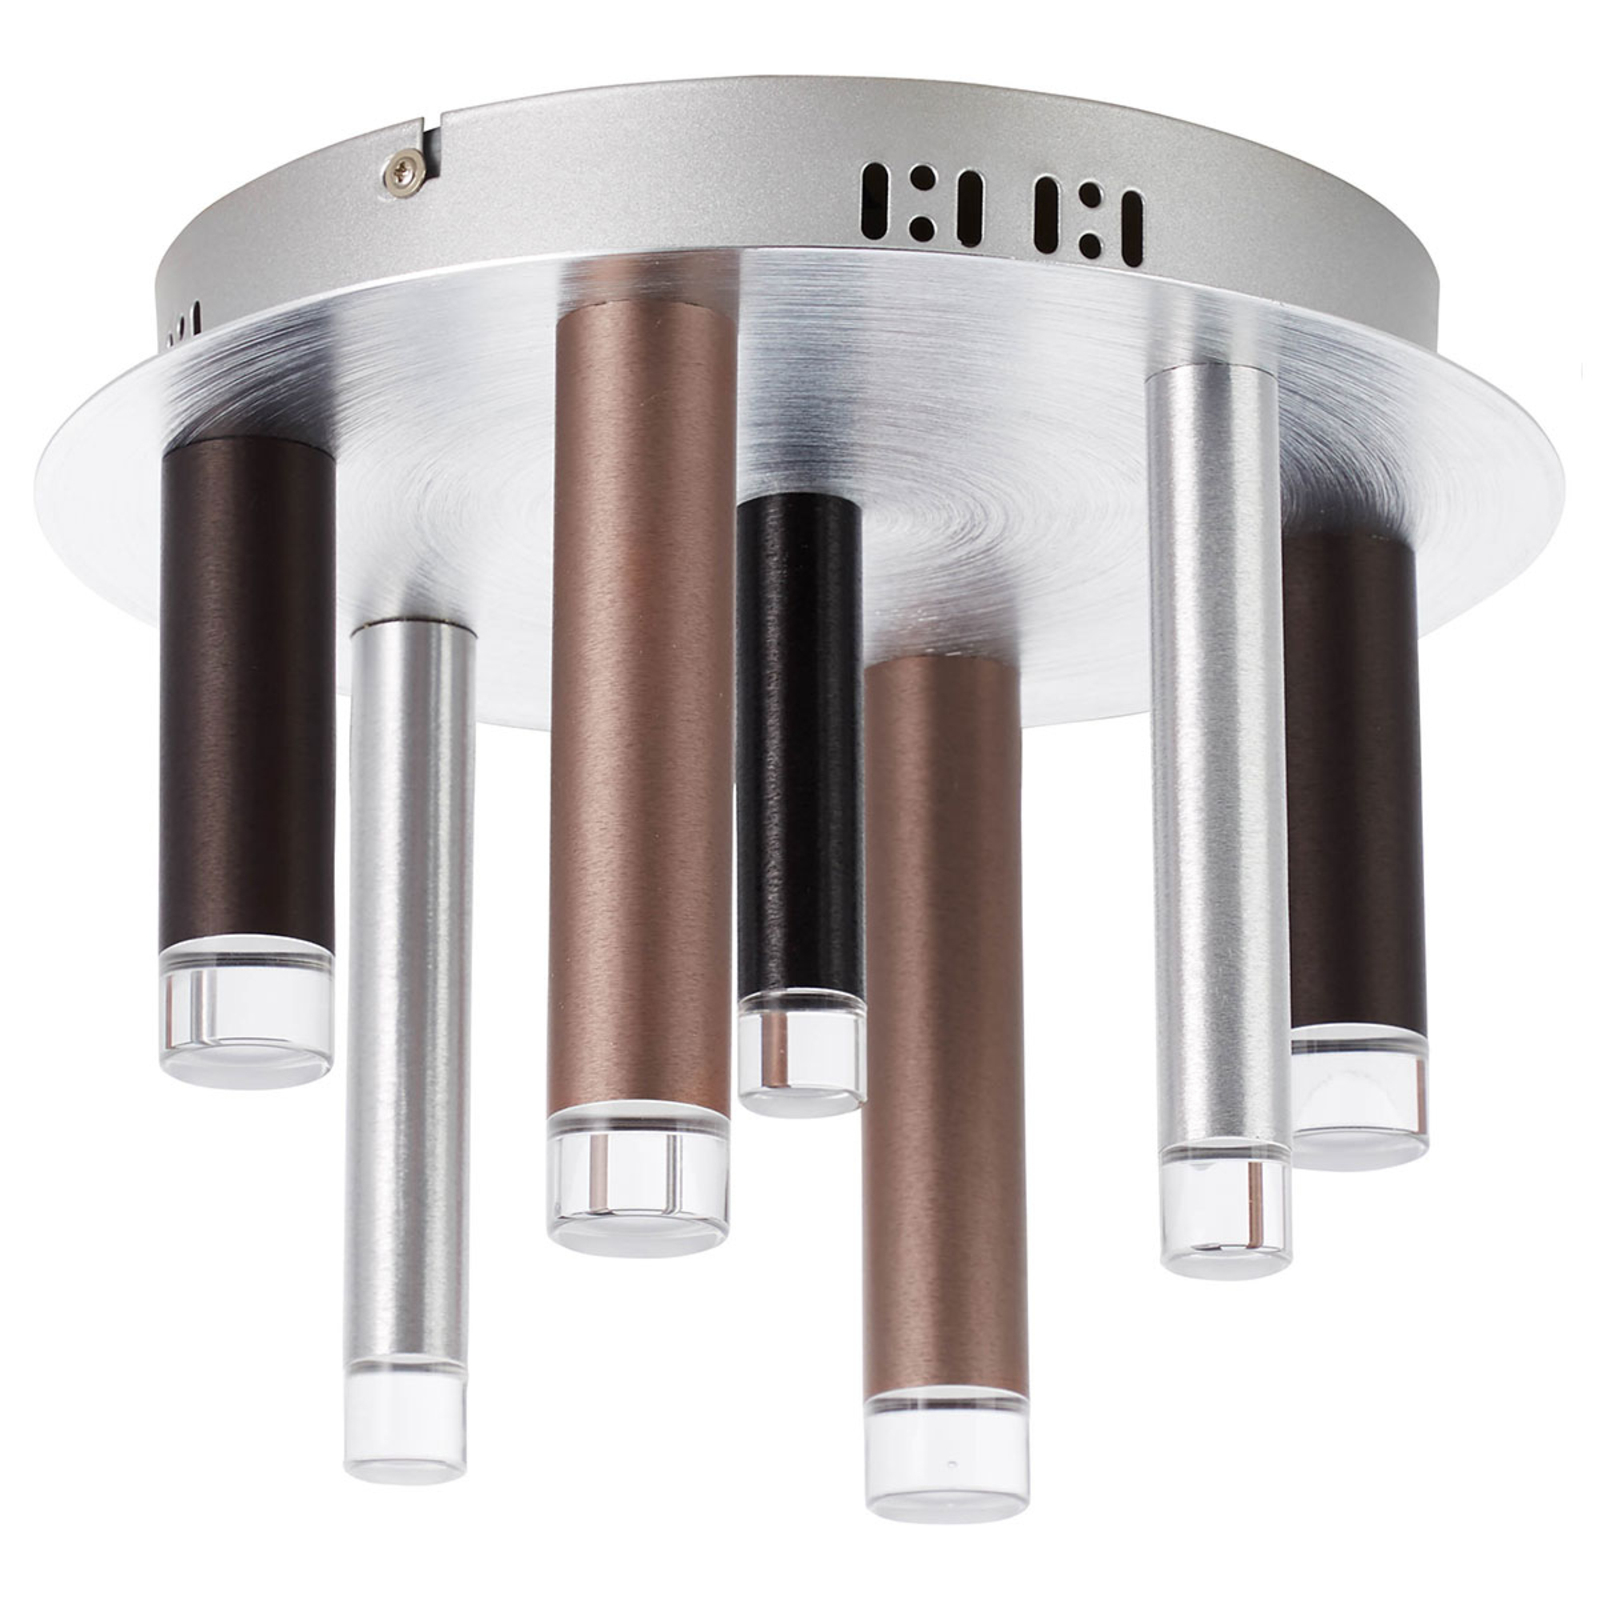 LED-Deckenlampe Cembalo dimmbar 7-flammig